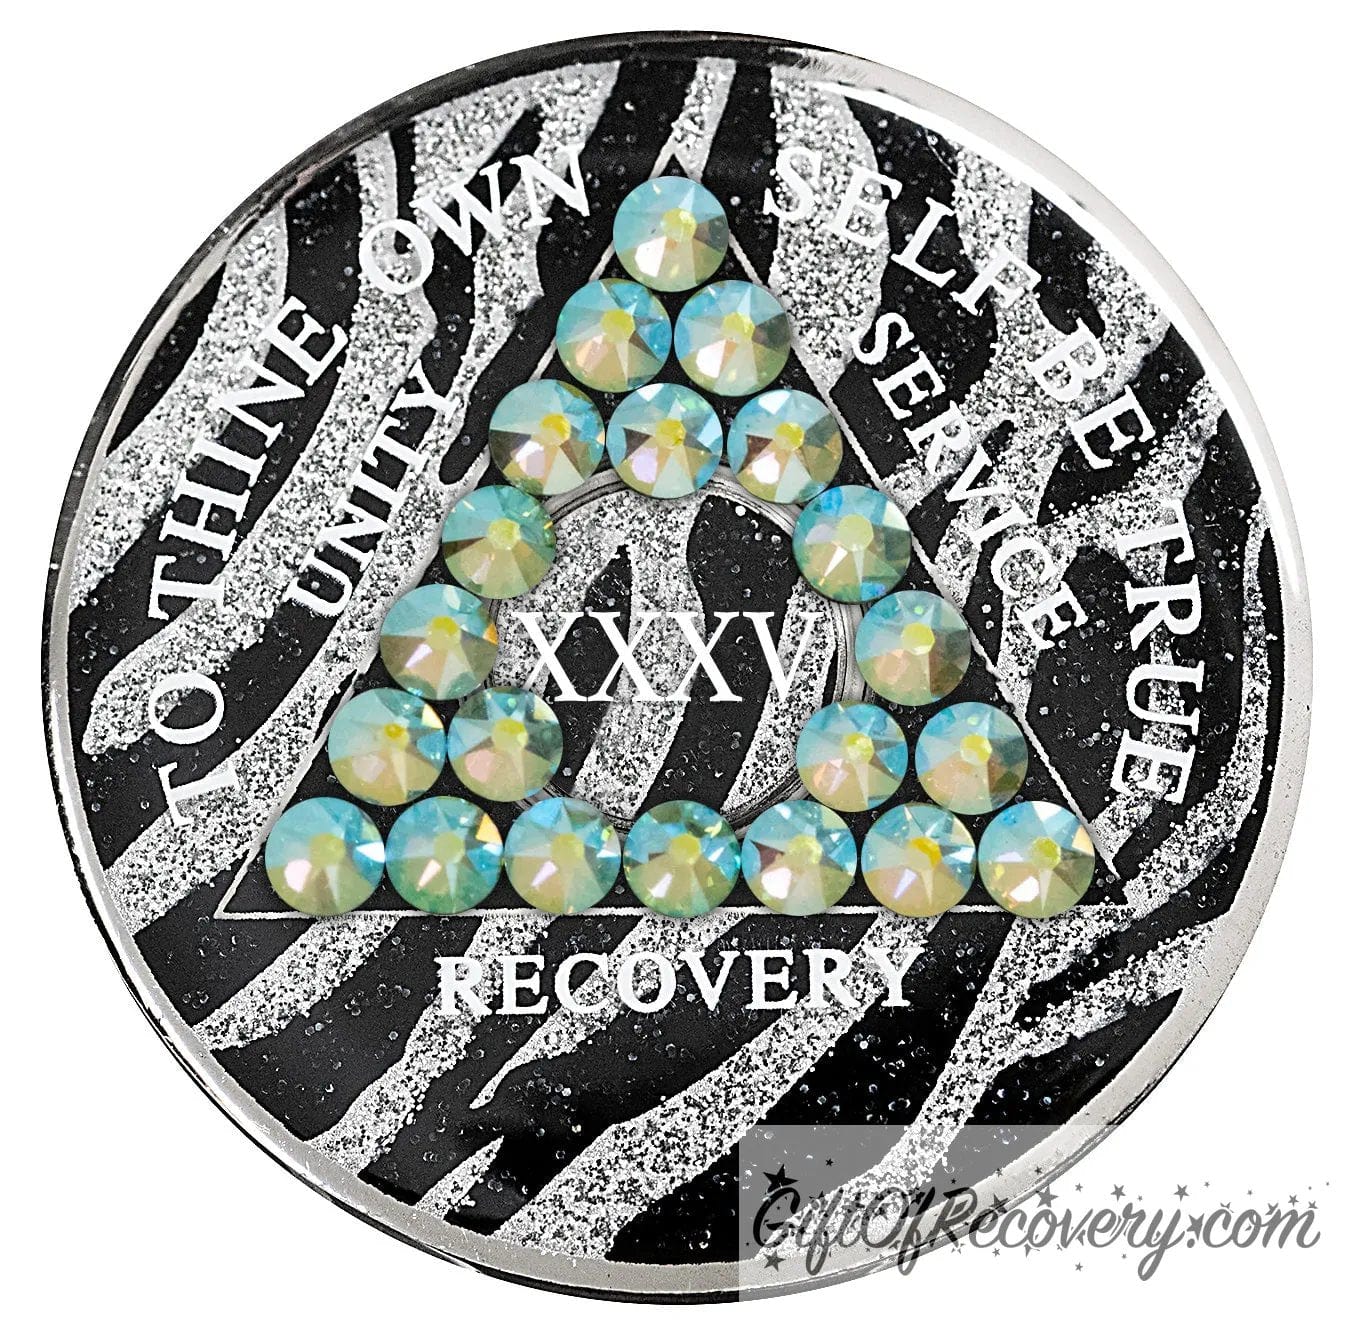 35 year Zebra glitter style AA medallion with 21 genuine peridot crystals, AA moto, unity, service, recovery, and roman numeral are in white and blend into the pattern, so you can let your recovery shine, not your time, the outer rim is silver plated, sealed in a high-quality, chip and scratch-resistant resin dome giving it a beautiful glossy look that will last.